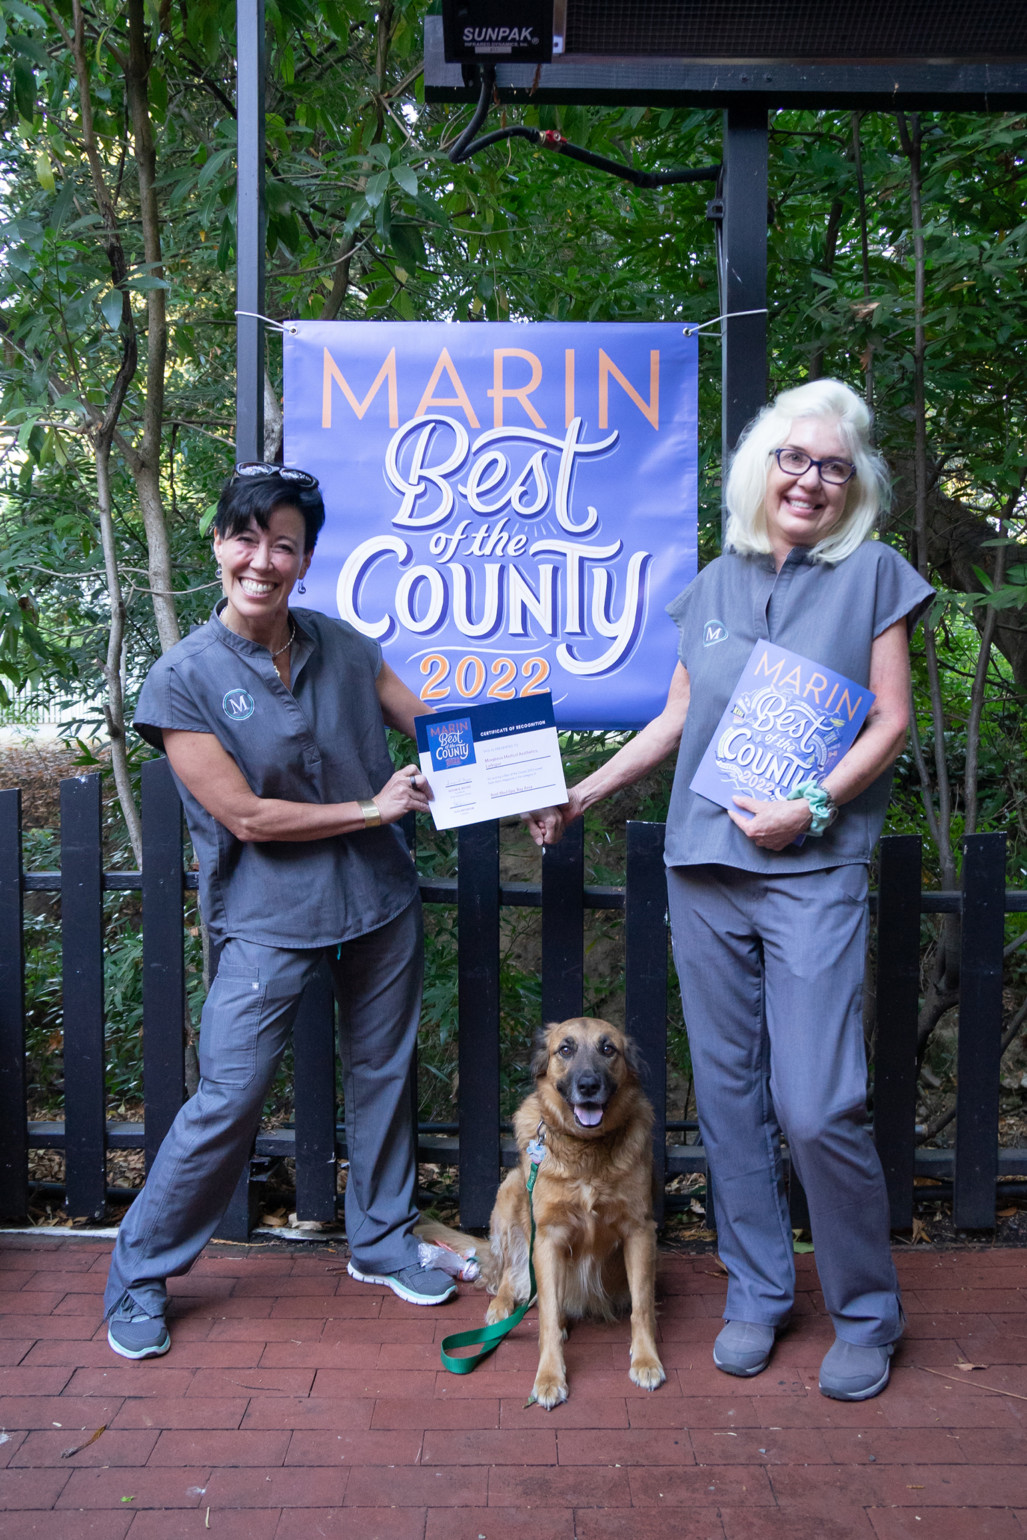 Marin Best of the County